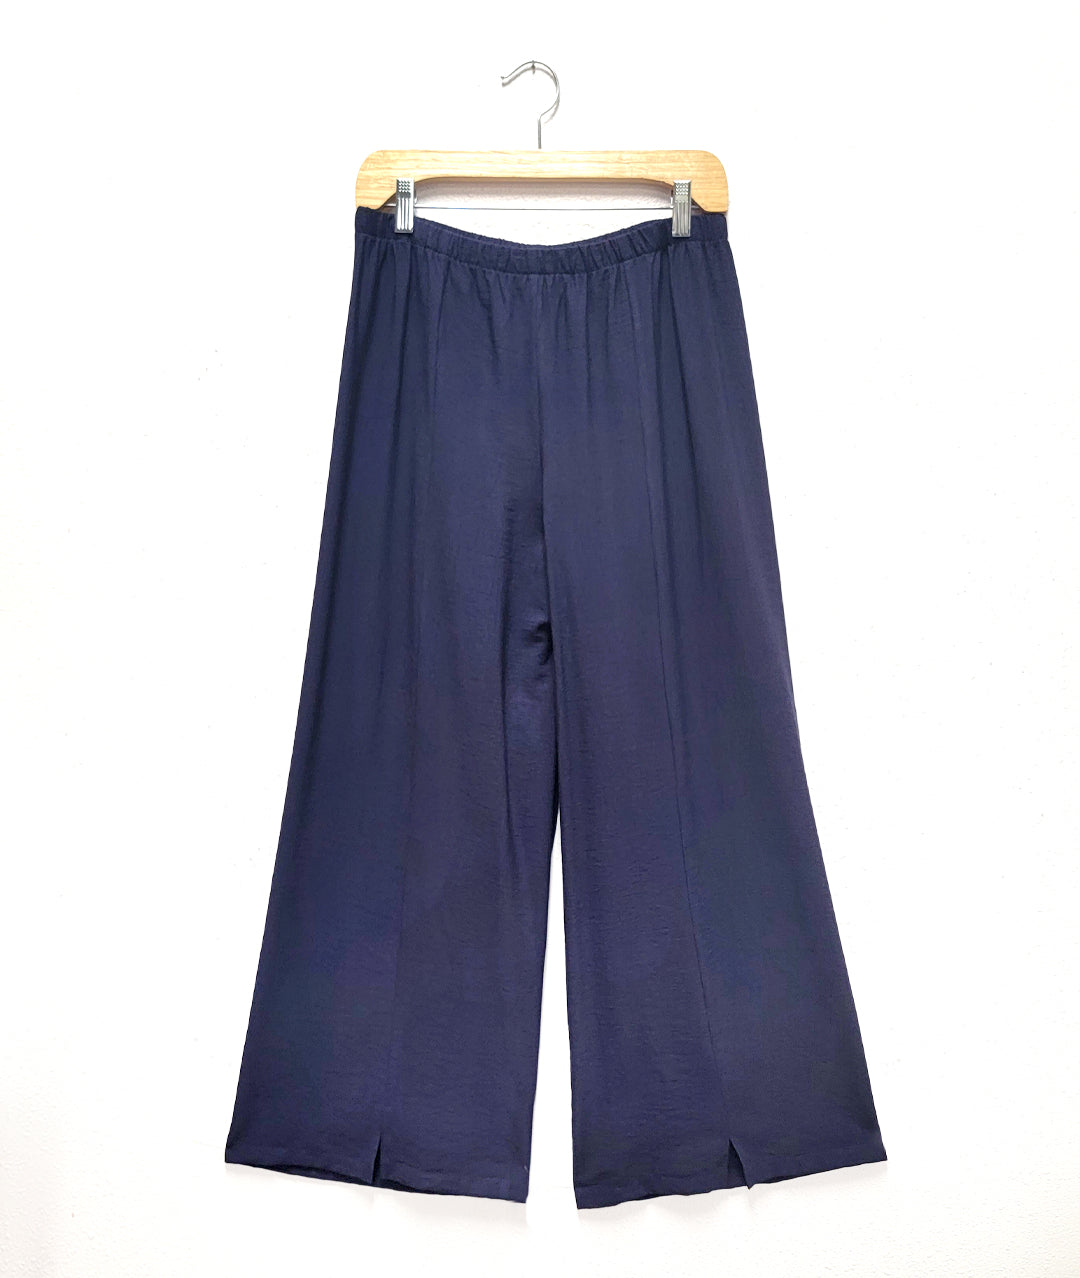 wide leg blue pant with a center seam and ankle split on either leg